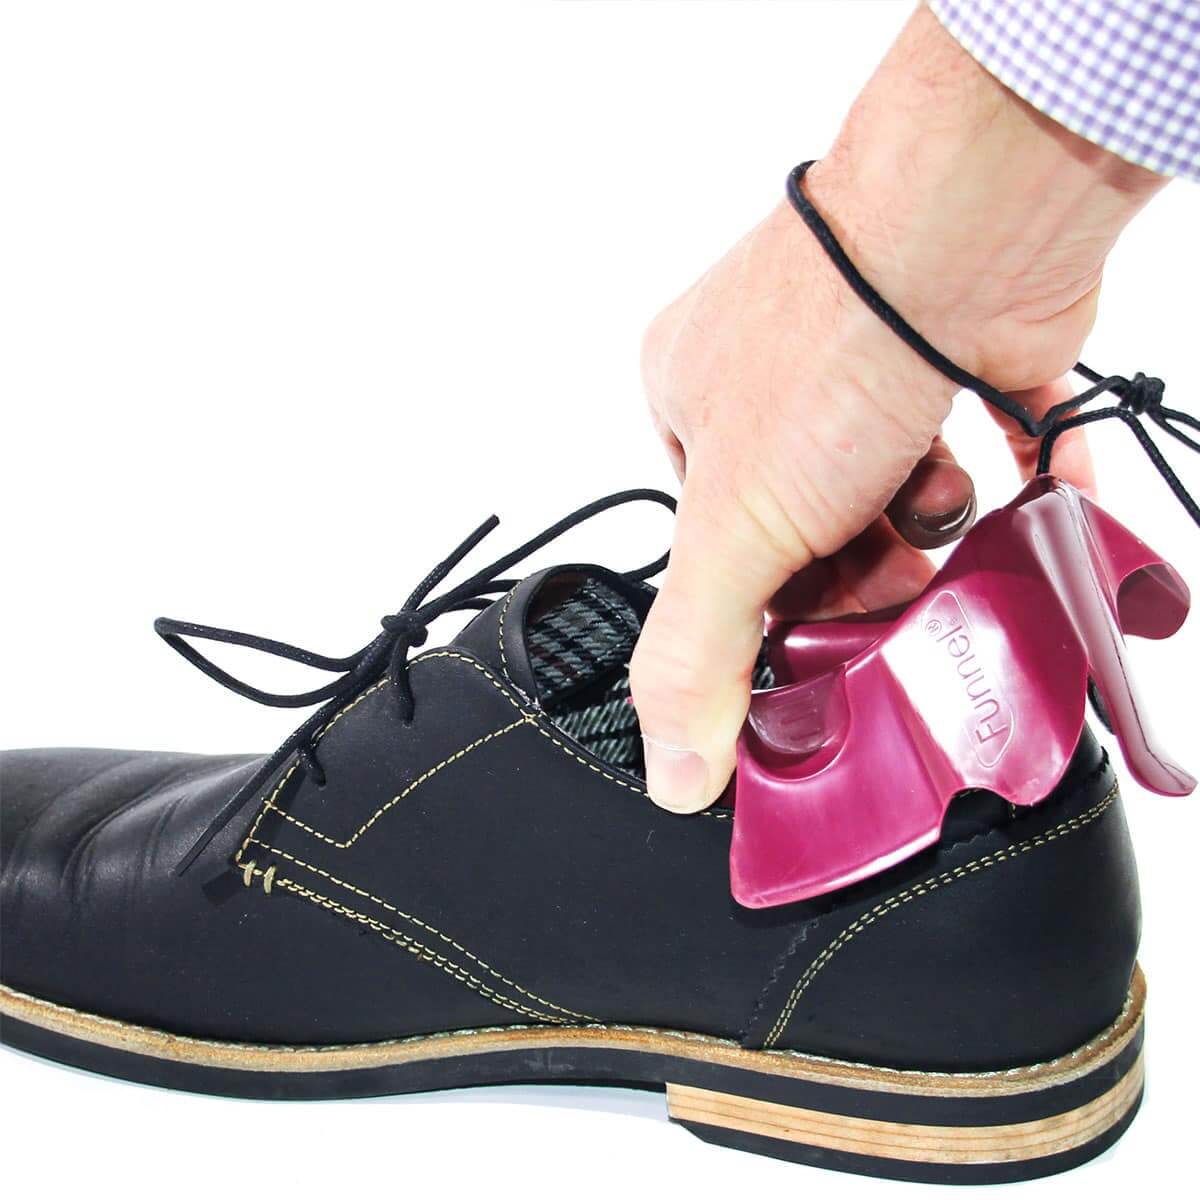 A man's hand placing the foot funnel in a shoe